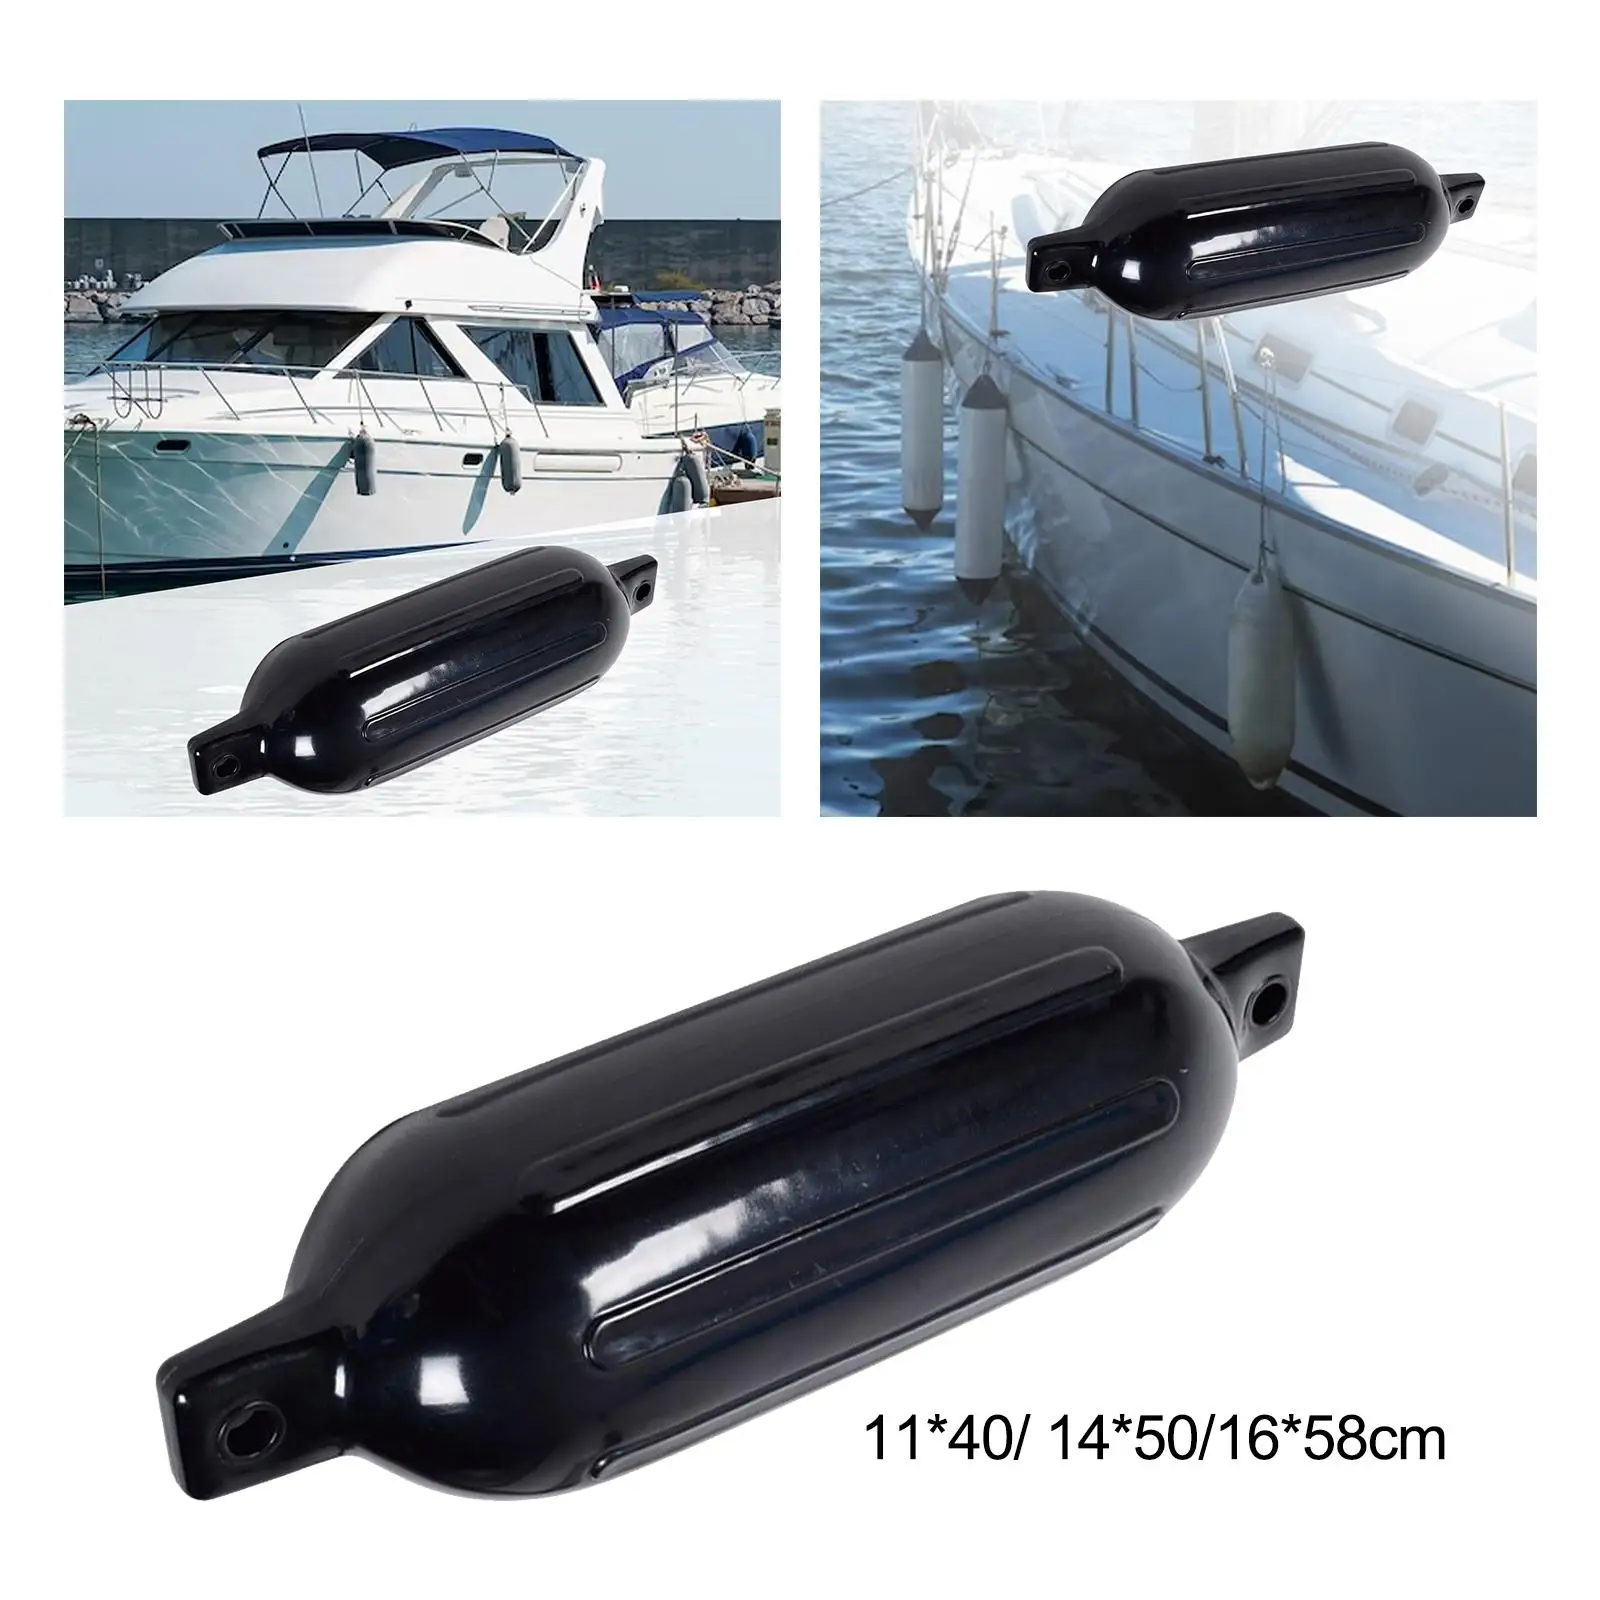 Boat Fenders Protection Boat Bumpers Boat Anchor for Yacht Docking Pontoon